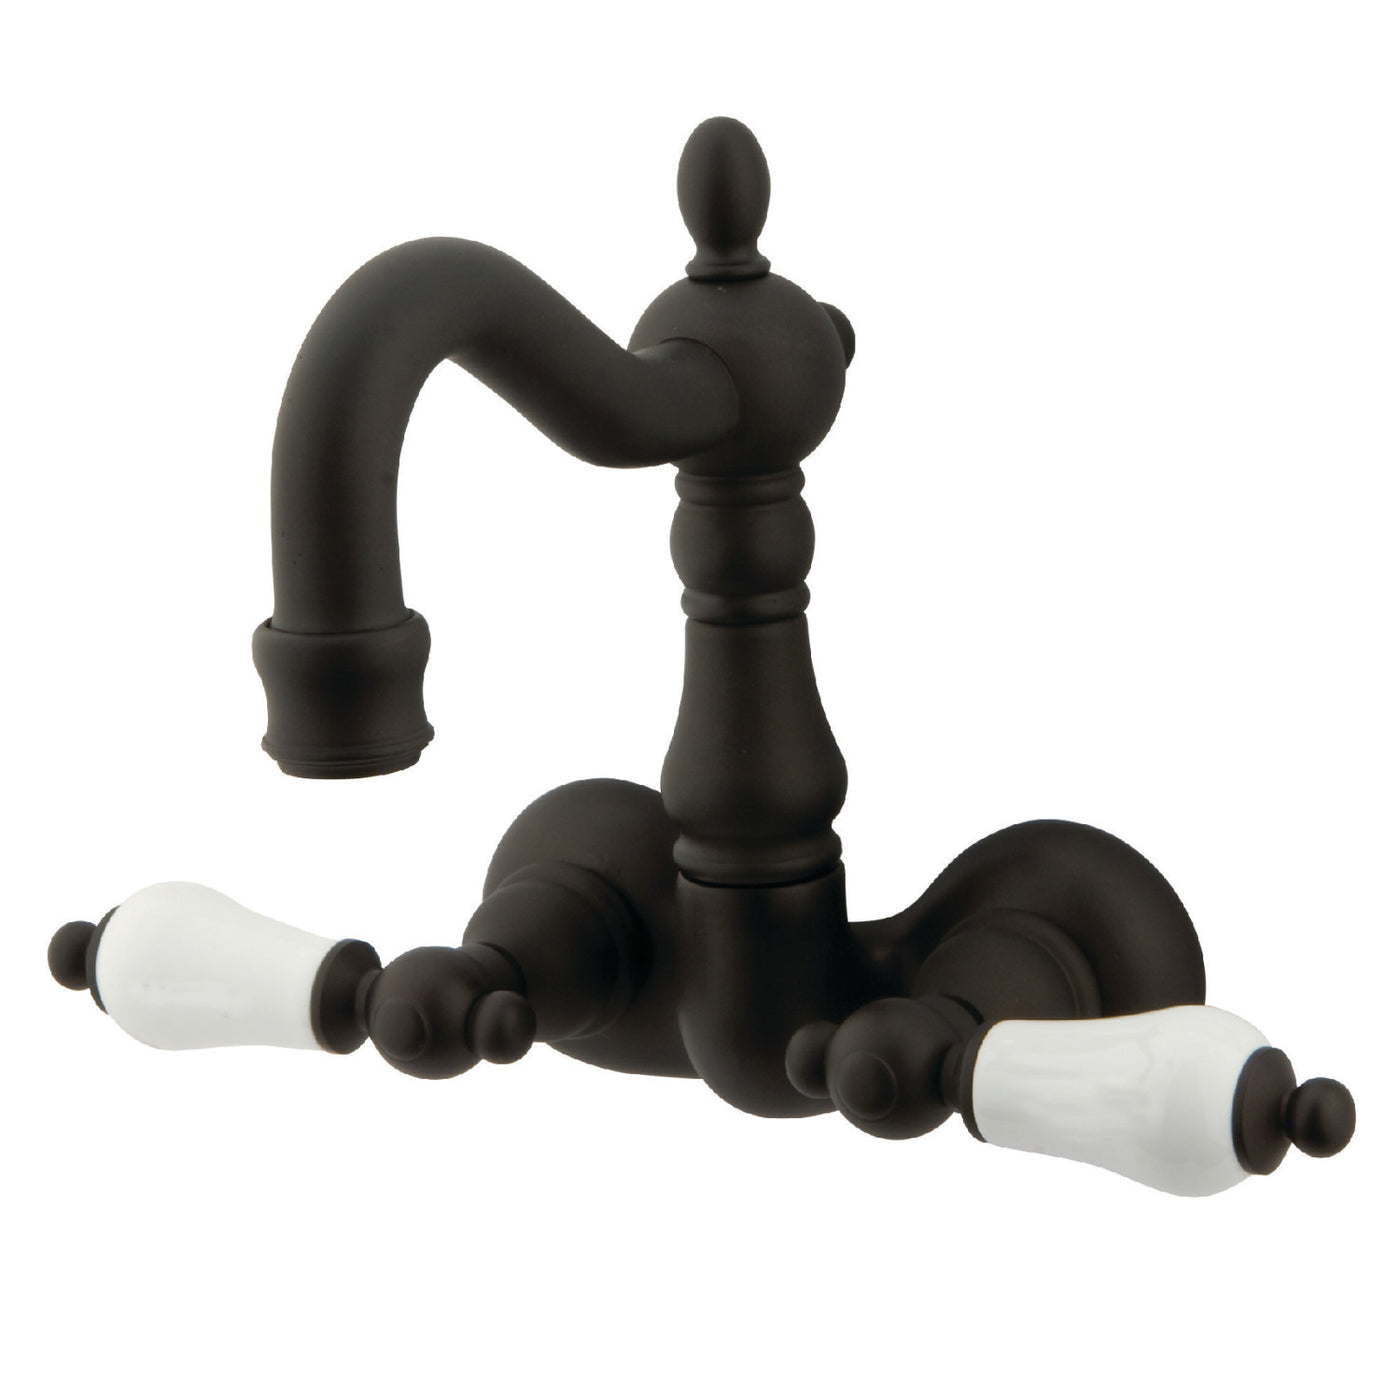 Elements of Design DT10715PL 3-3/8-Inch Wall Mount Tub Faucet, Oil Rubbed Bronze